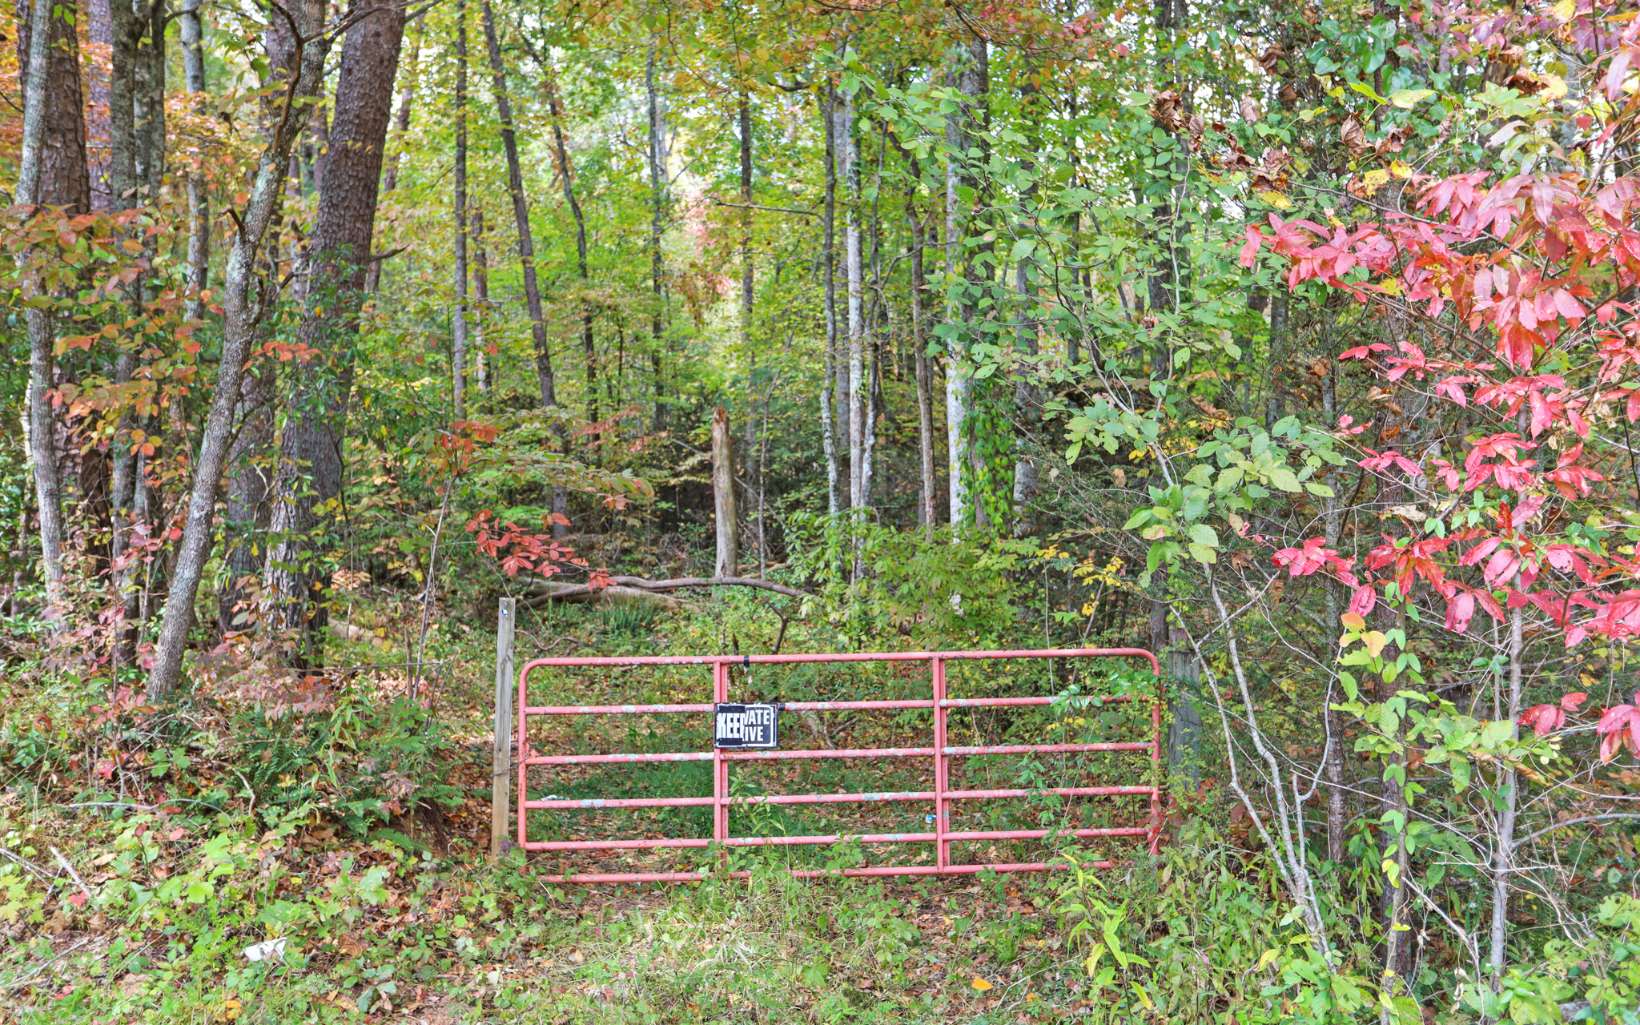 Looking for your own private compound, this 84.83 acre tract is for you. Private with an array of different characteristic's. Great Location, Close to USFS, Blue Ridge Downtown, McCaysville, Toccoa River & Blue Ridge Lake. Large enough to hunt, sub-divide for family members or keep for your very own. Paved access to Gate, with 2 entrances you would be able to do most anything. Seasonal views, Property is in Conservation program and only 1 acre has very light restrictions (not the entire property). Recorded Easement to the property. There is a new survey in the process of being completed. Professional photos are coming.